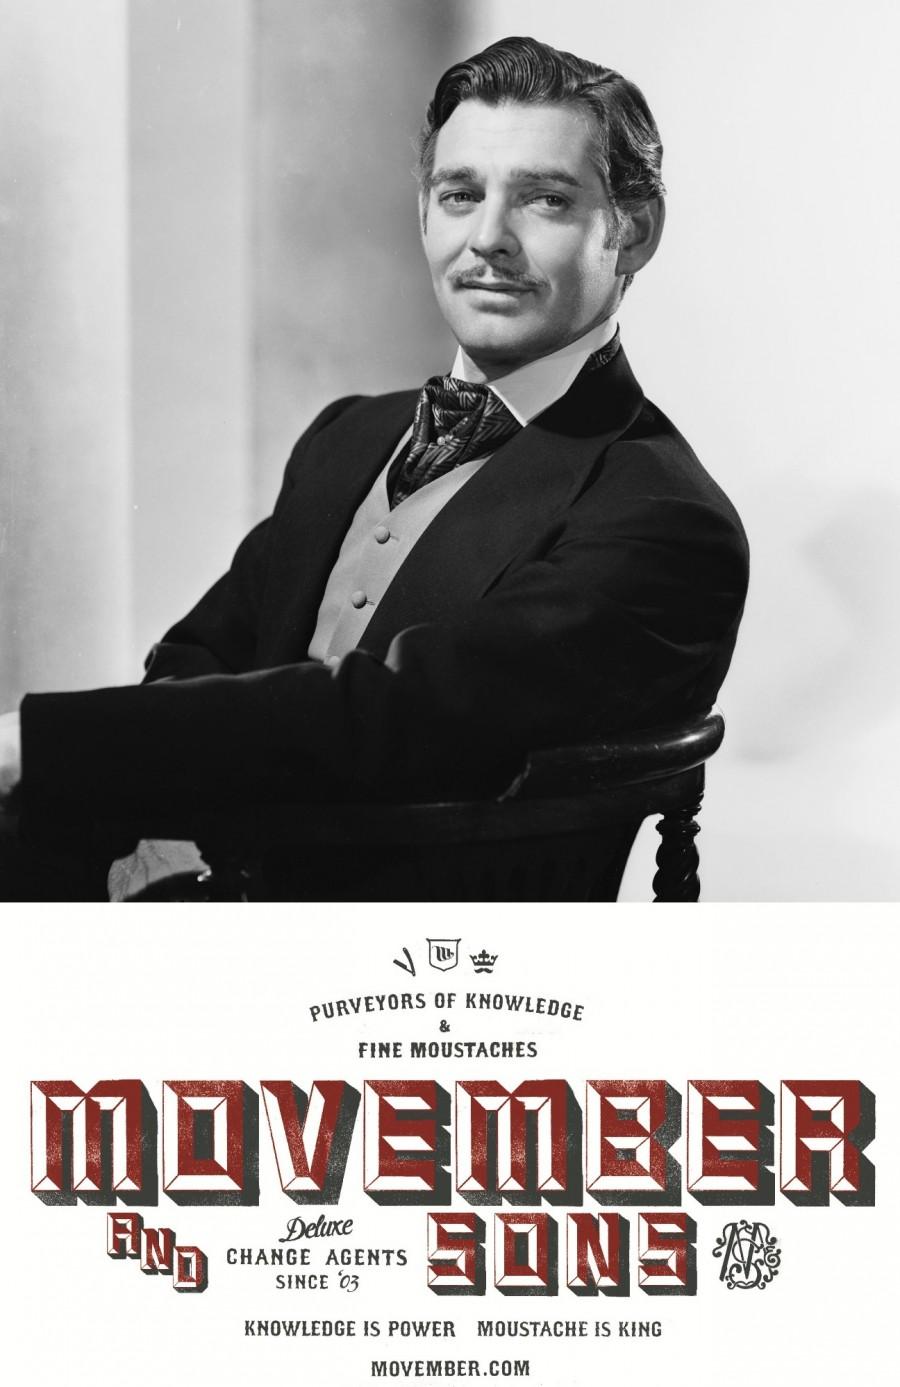 Wedding - A Celebration of Grooms and their Mos for Movember